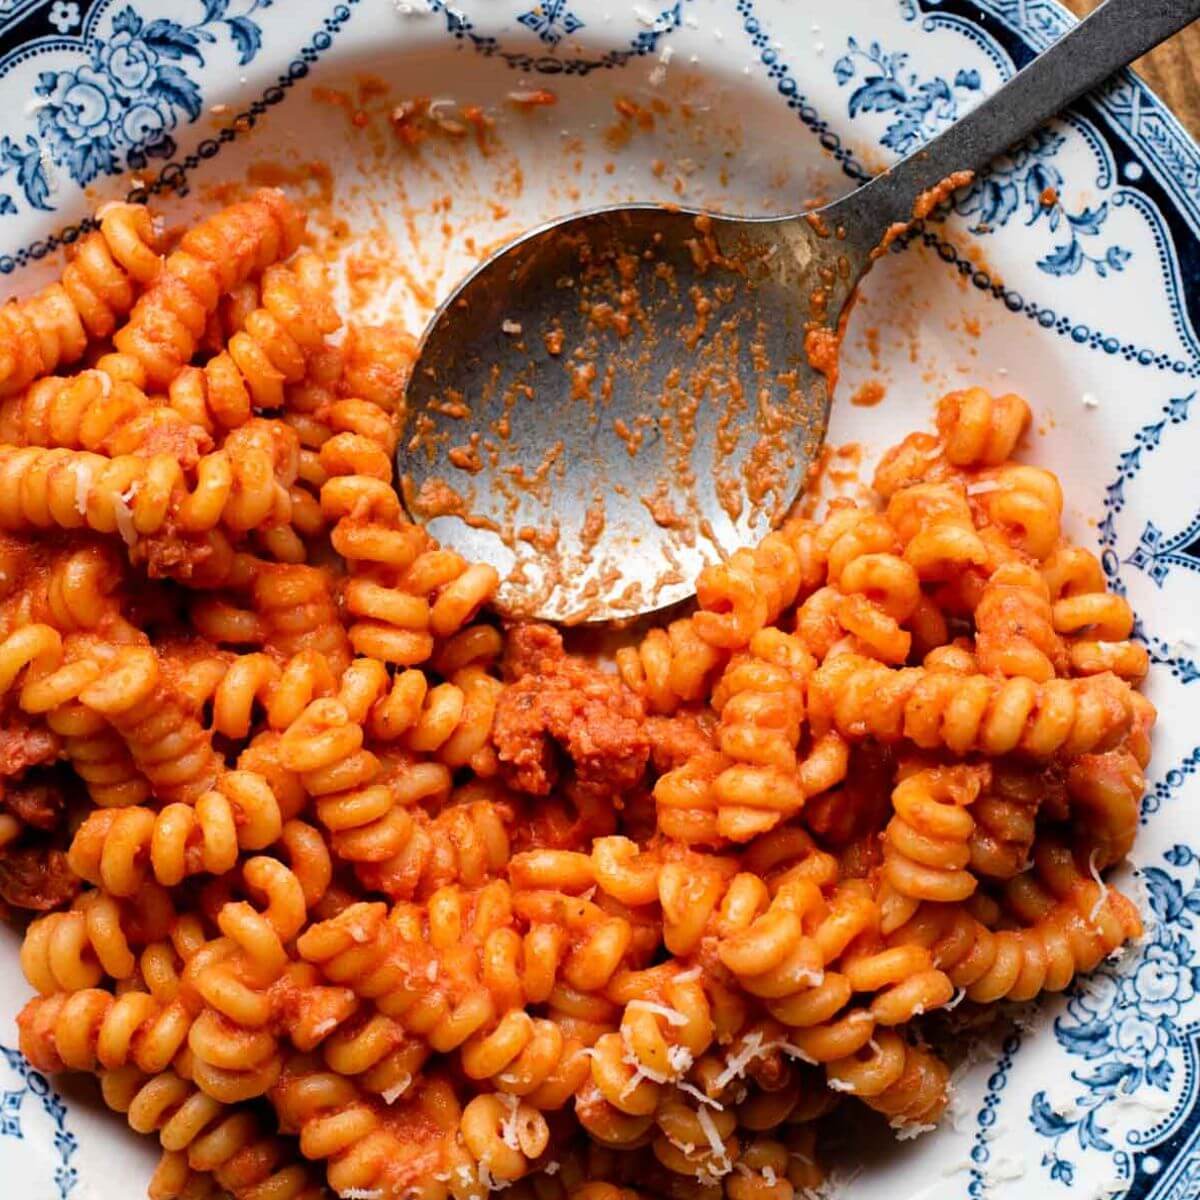 Creamy tomato sausage pasta in a blue patterned bowl with a serving spoon